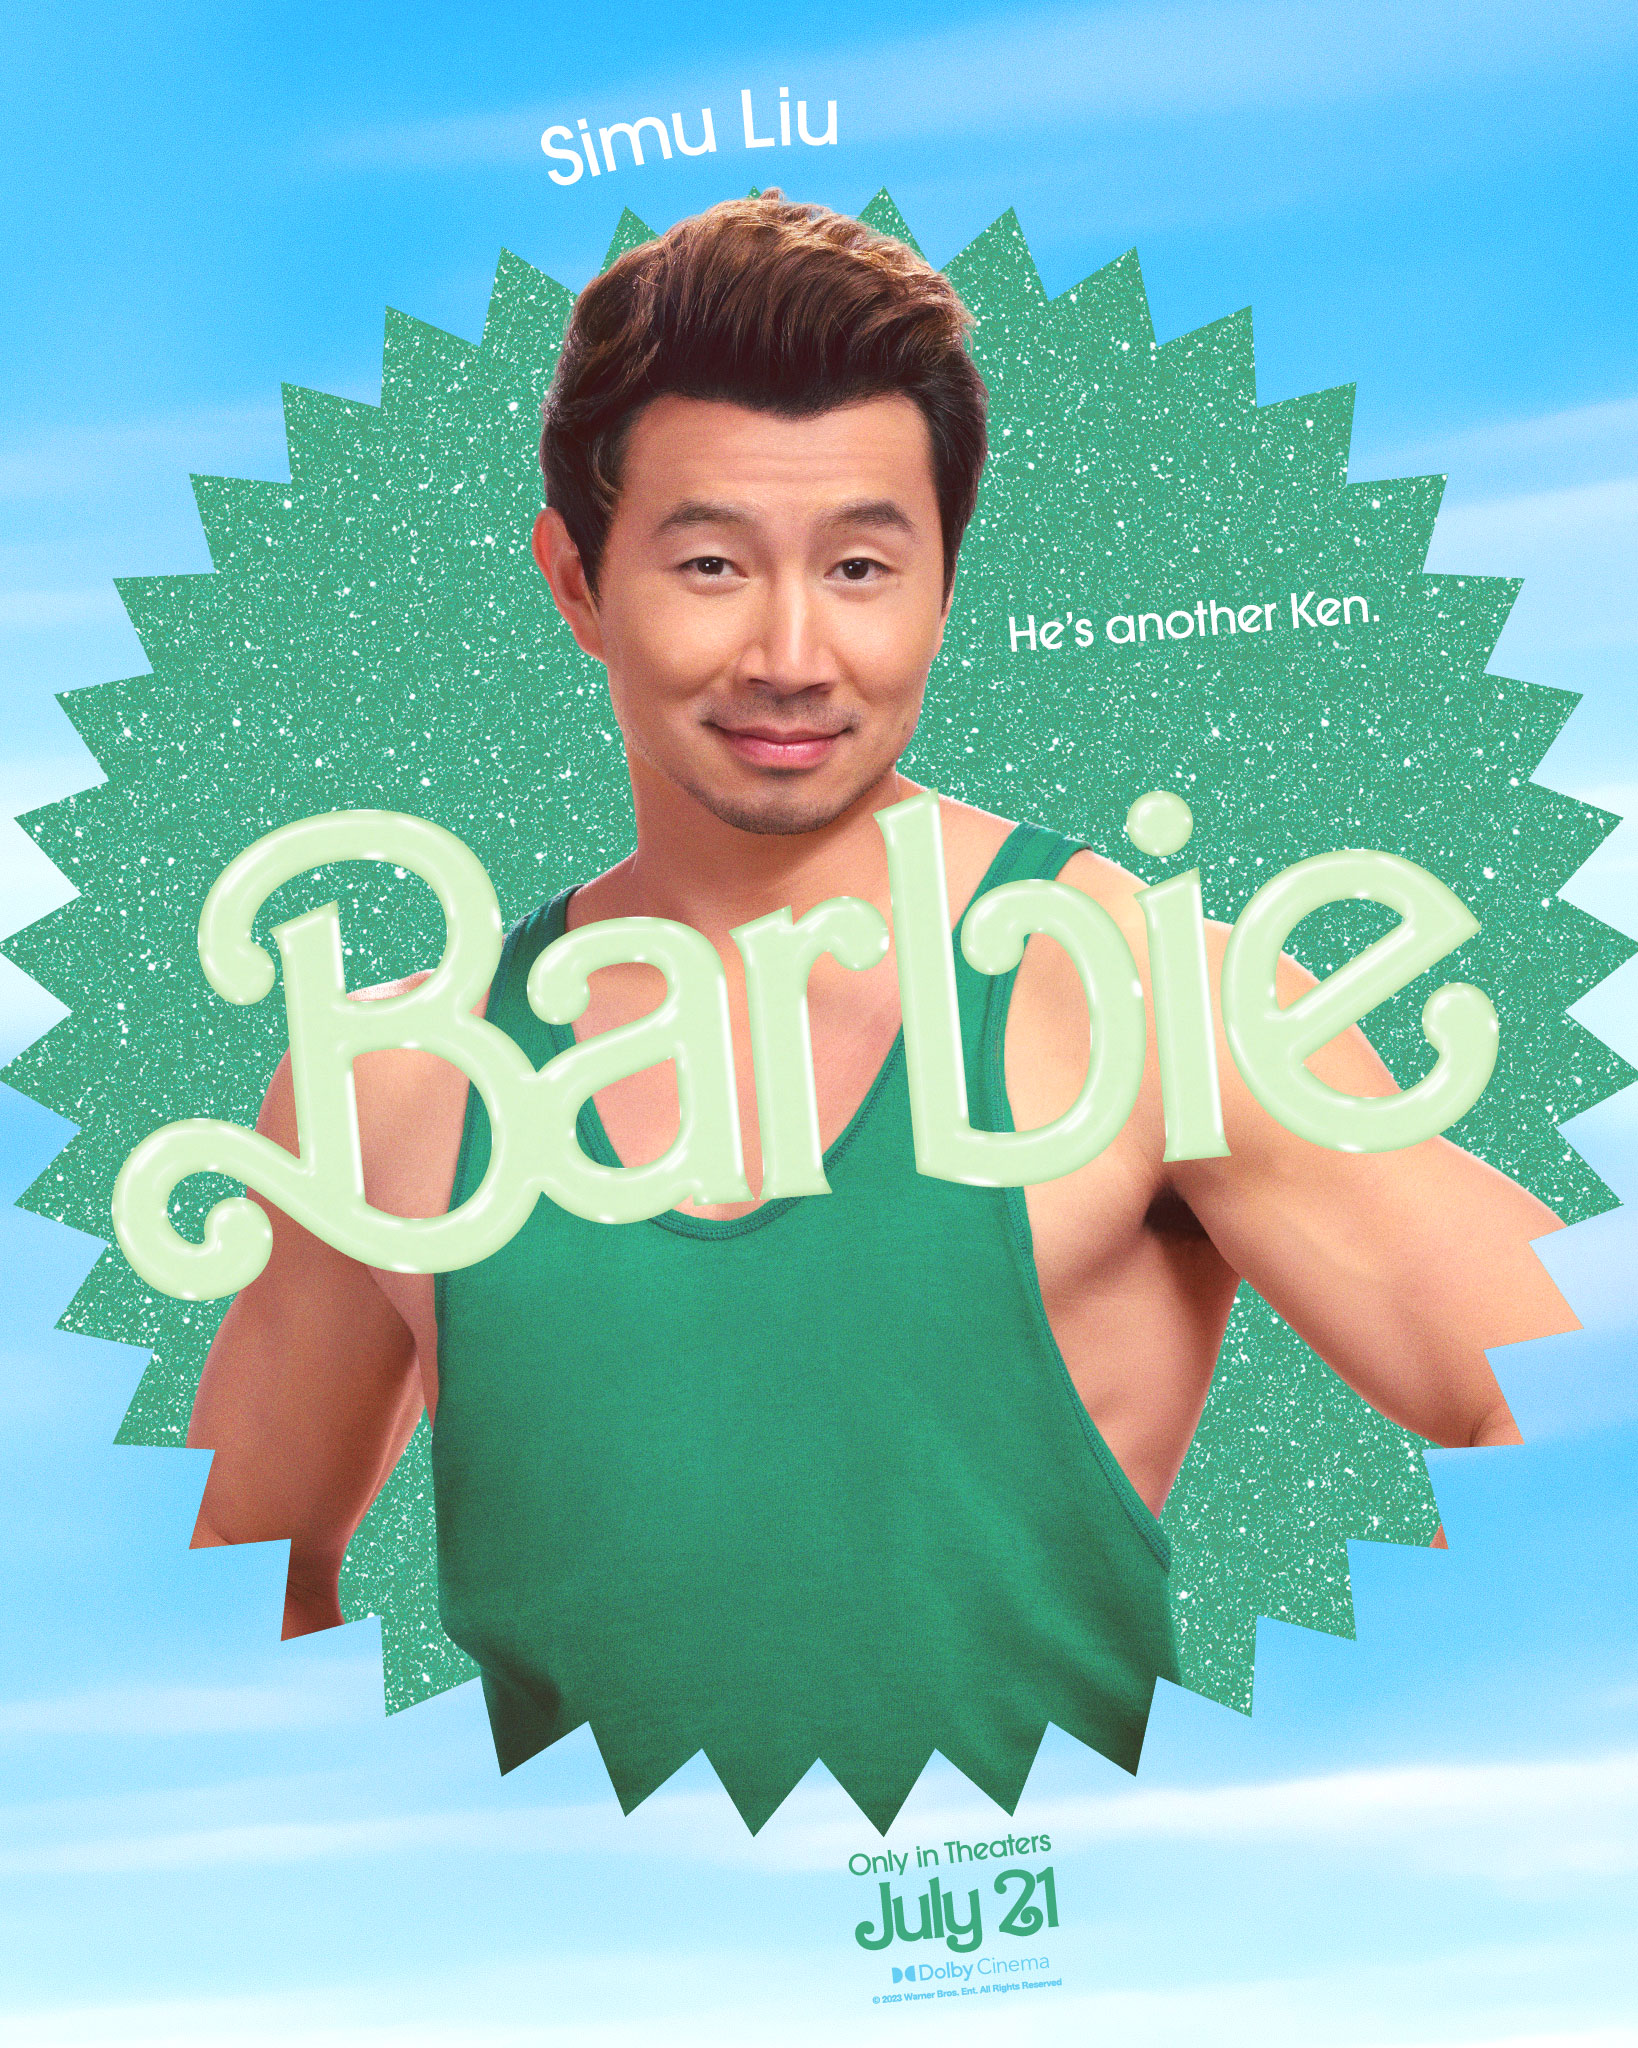 Barbie Trailer & Character Posters Tease Adventure Into the Real World